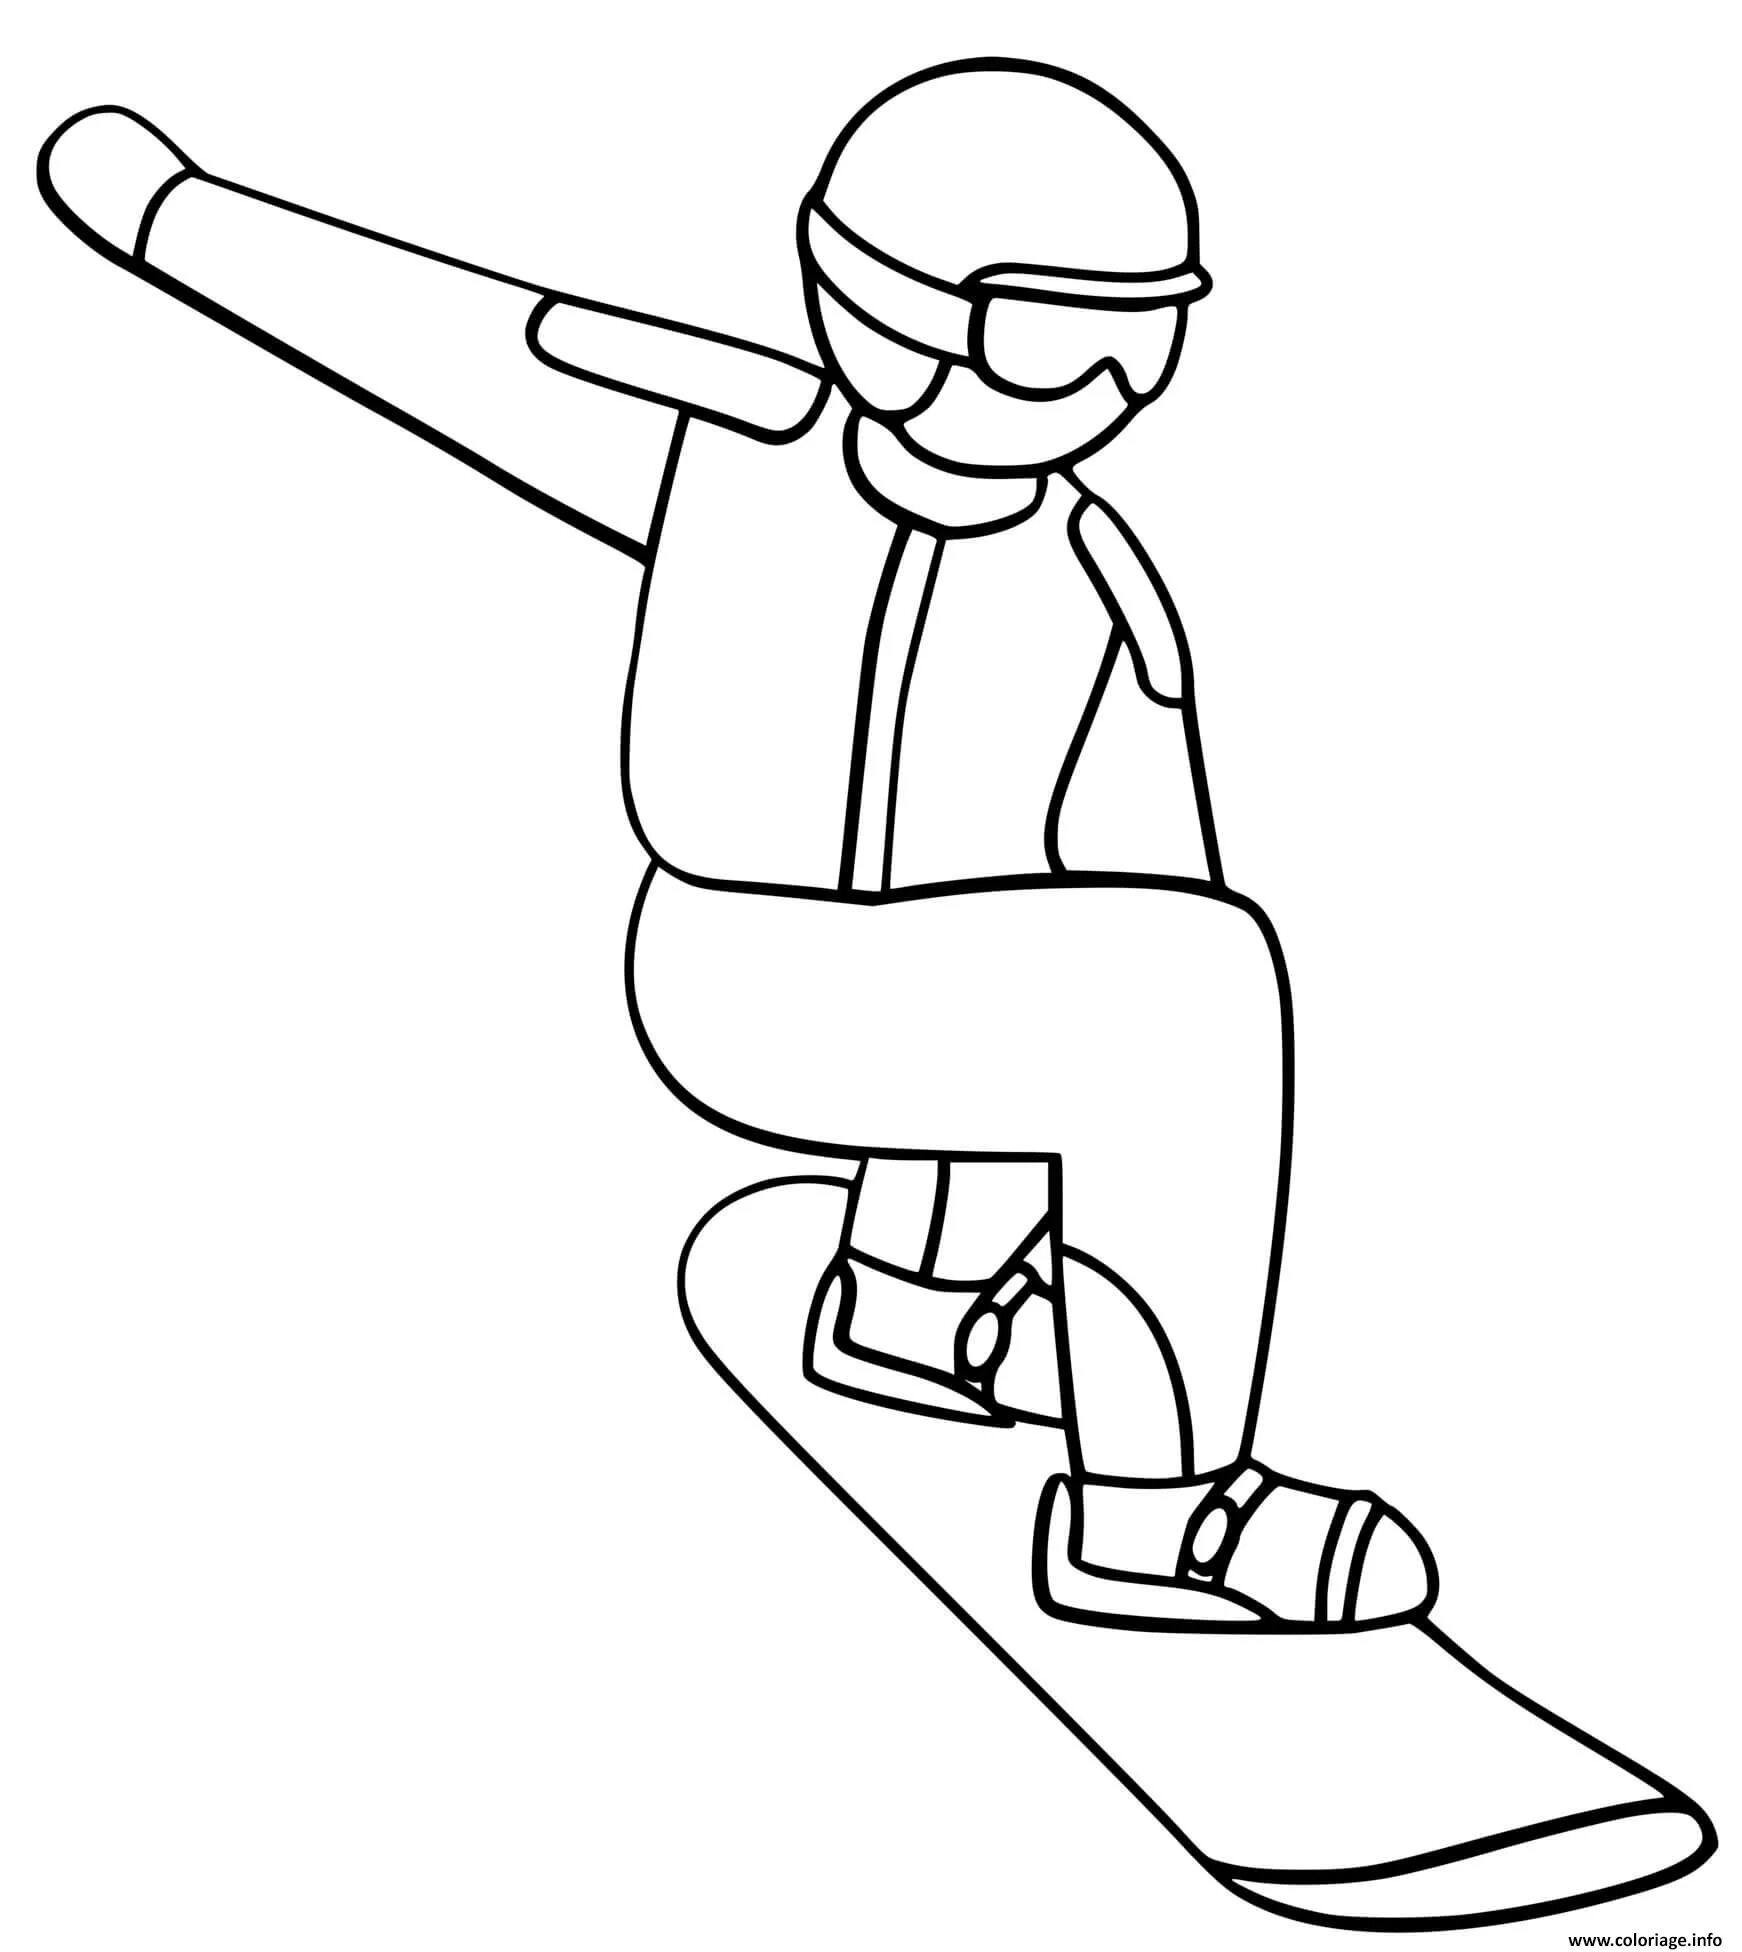 Snowboarder coloring book for kids